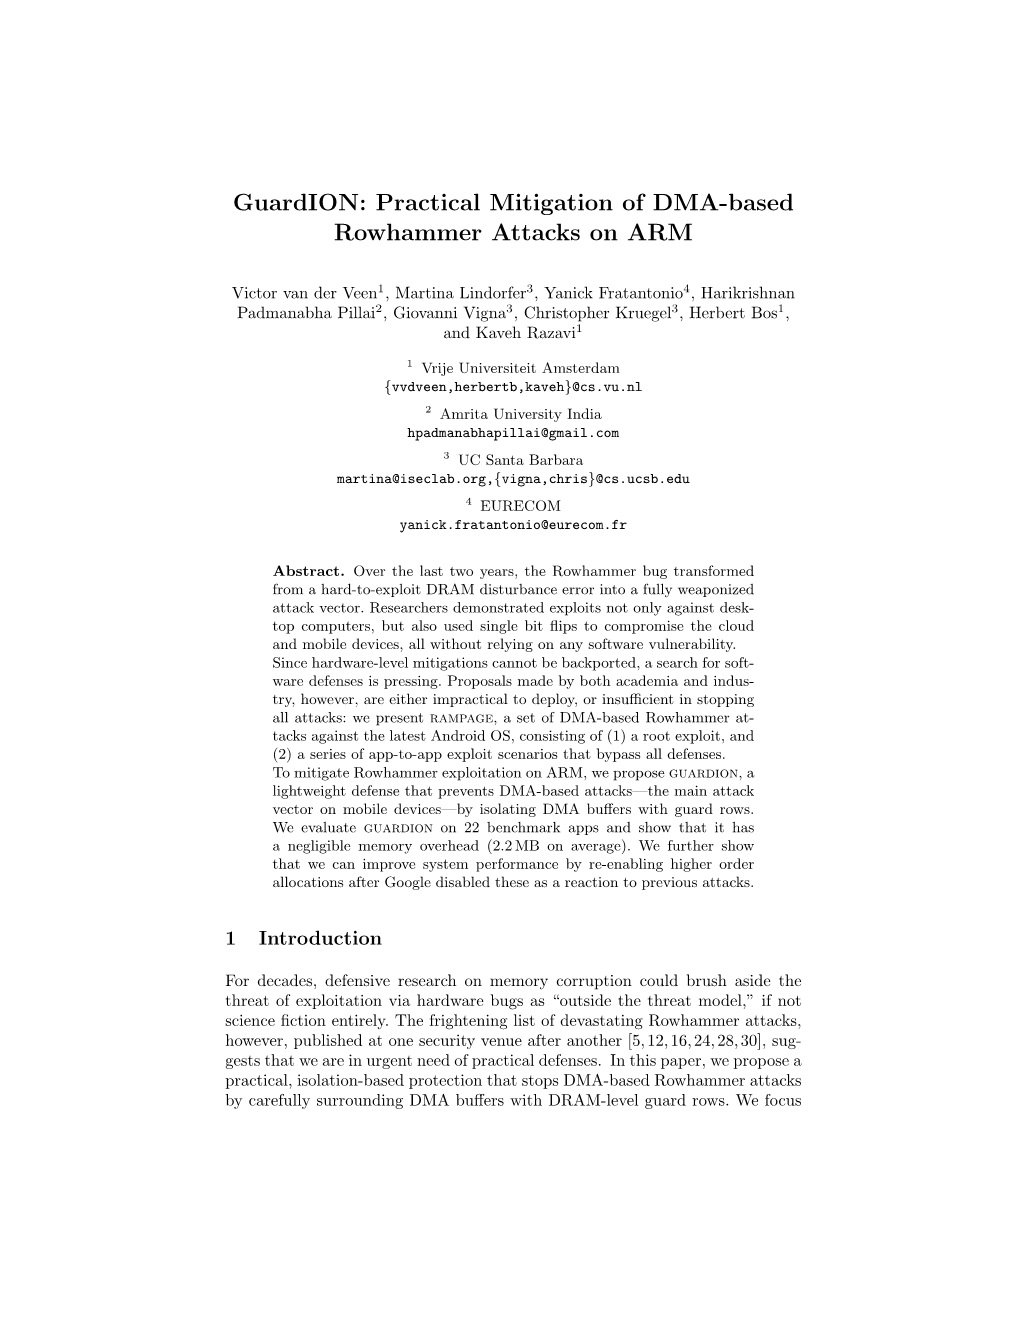 Guardion: Practical Mitigation of DMA-Based Rowhammer Attacks on ARM